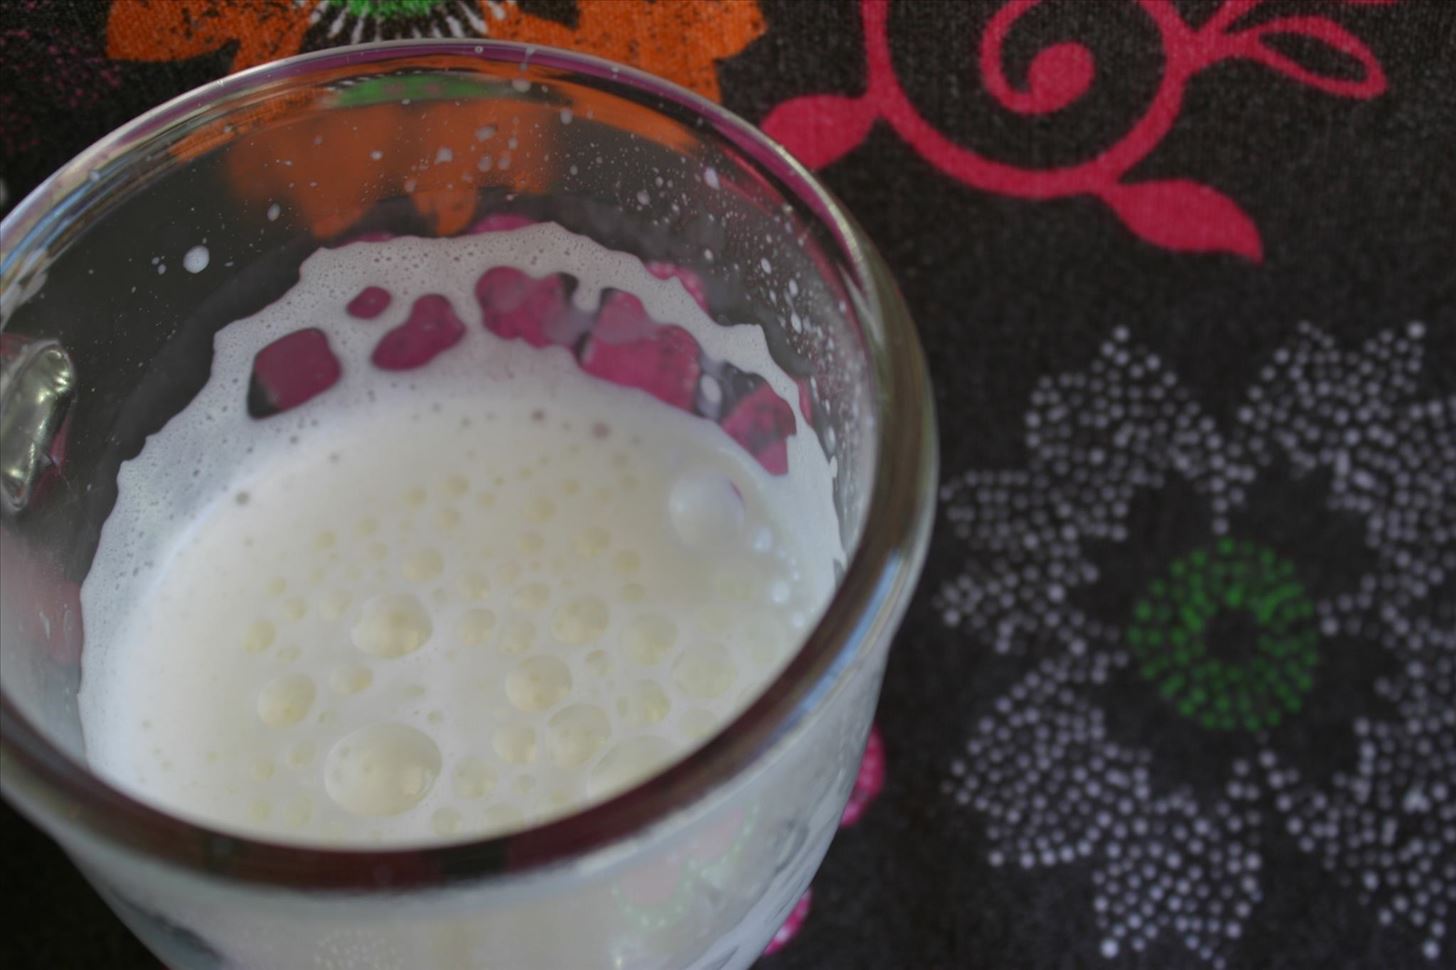 The Science of Frothing: How to Make Your Own Milk Foam